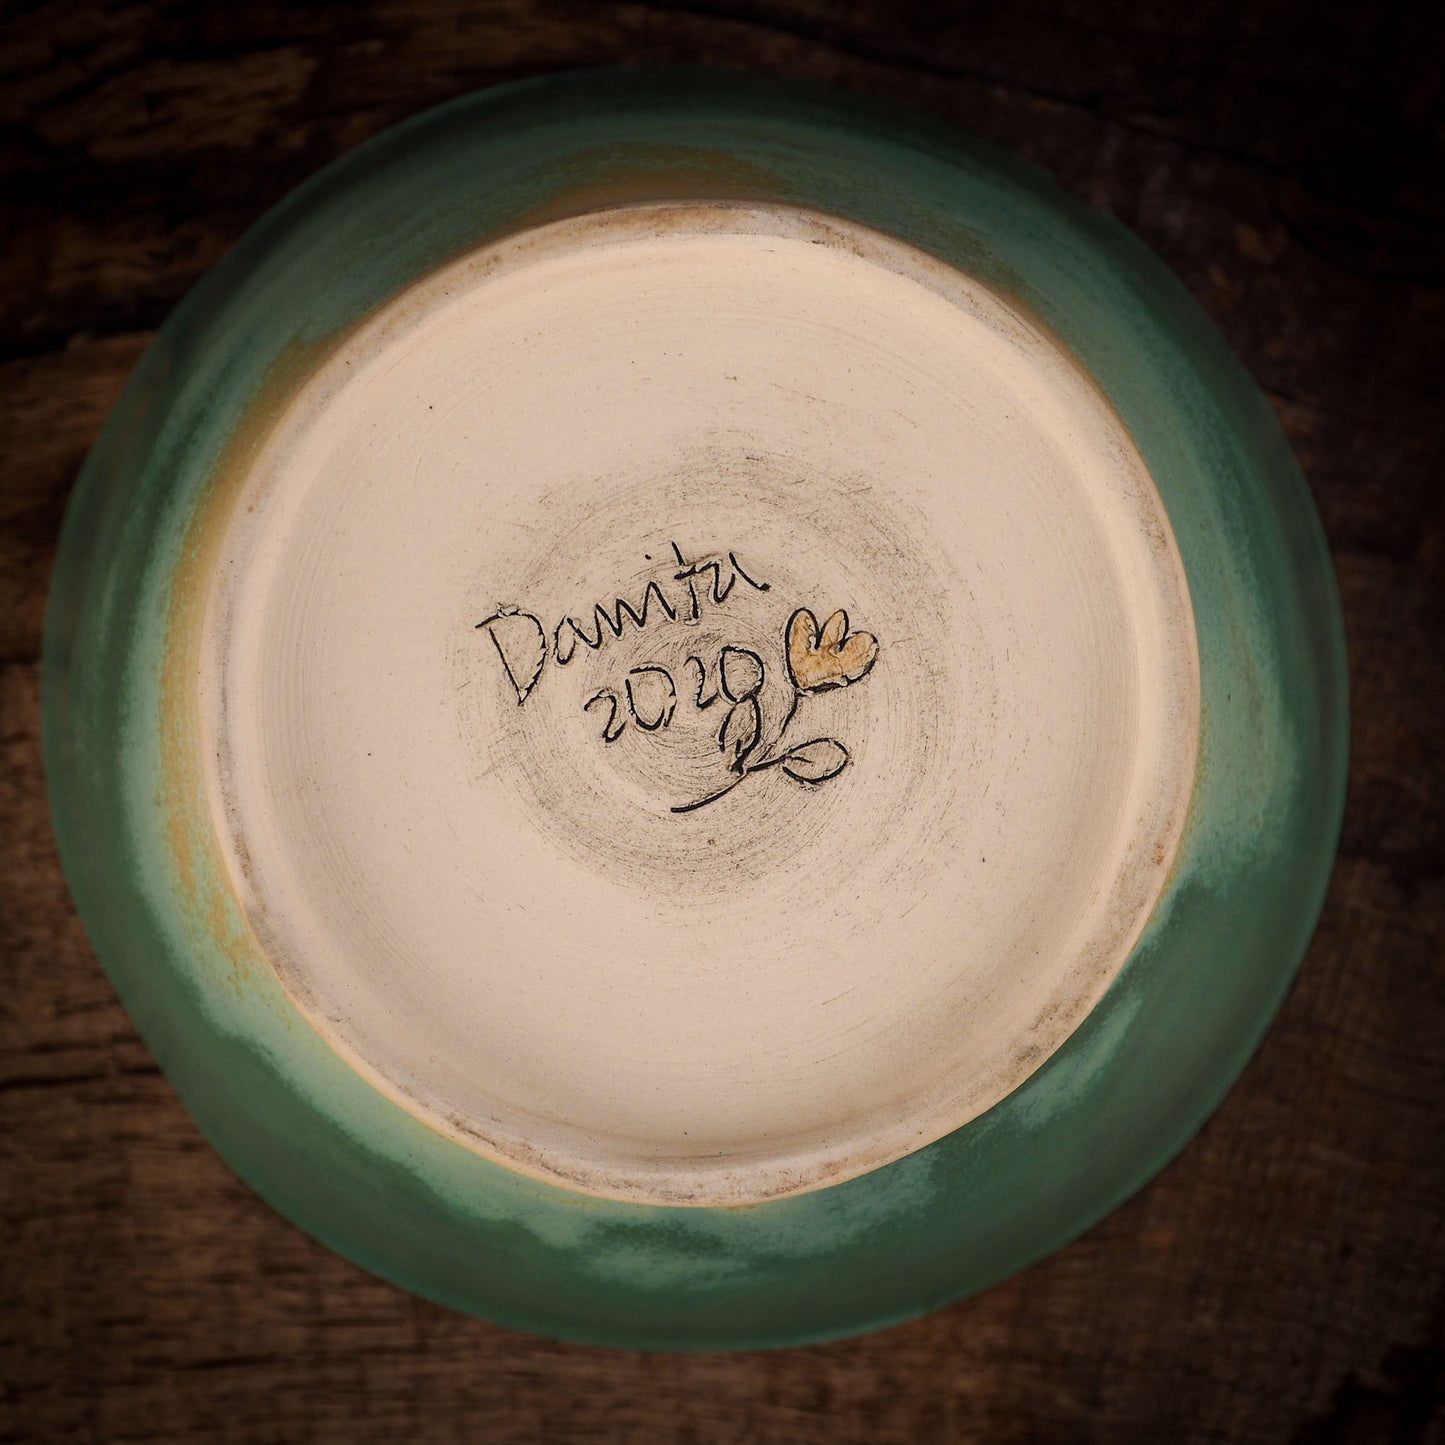 An original glazed ceramic food bowl by Idania Salcido, the artist behind Danita Art. With deep green hue glazes and hand decorated figures on the sides. Totally handmade in my studio, this is a unique piece that cannot be repeated. Food and drink safe, hand wash only.